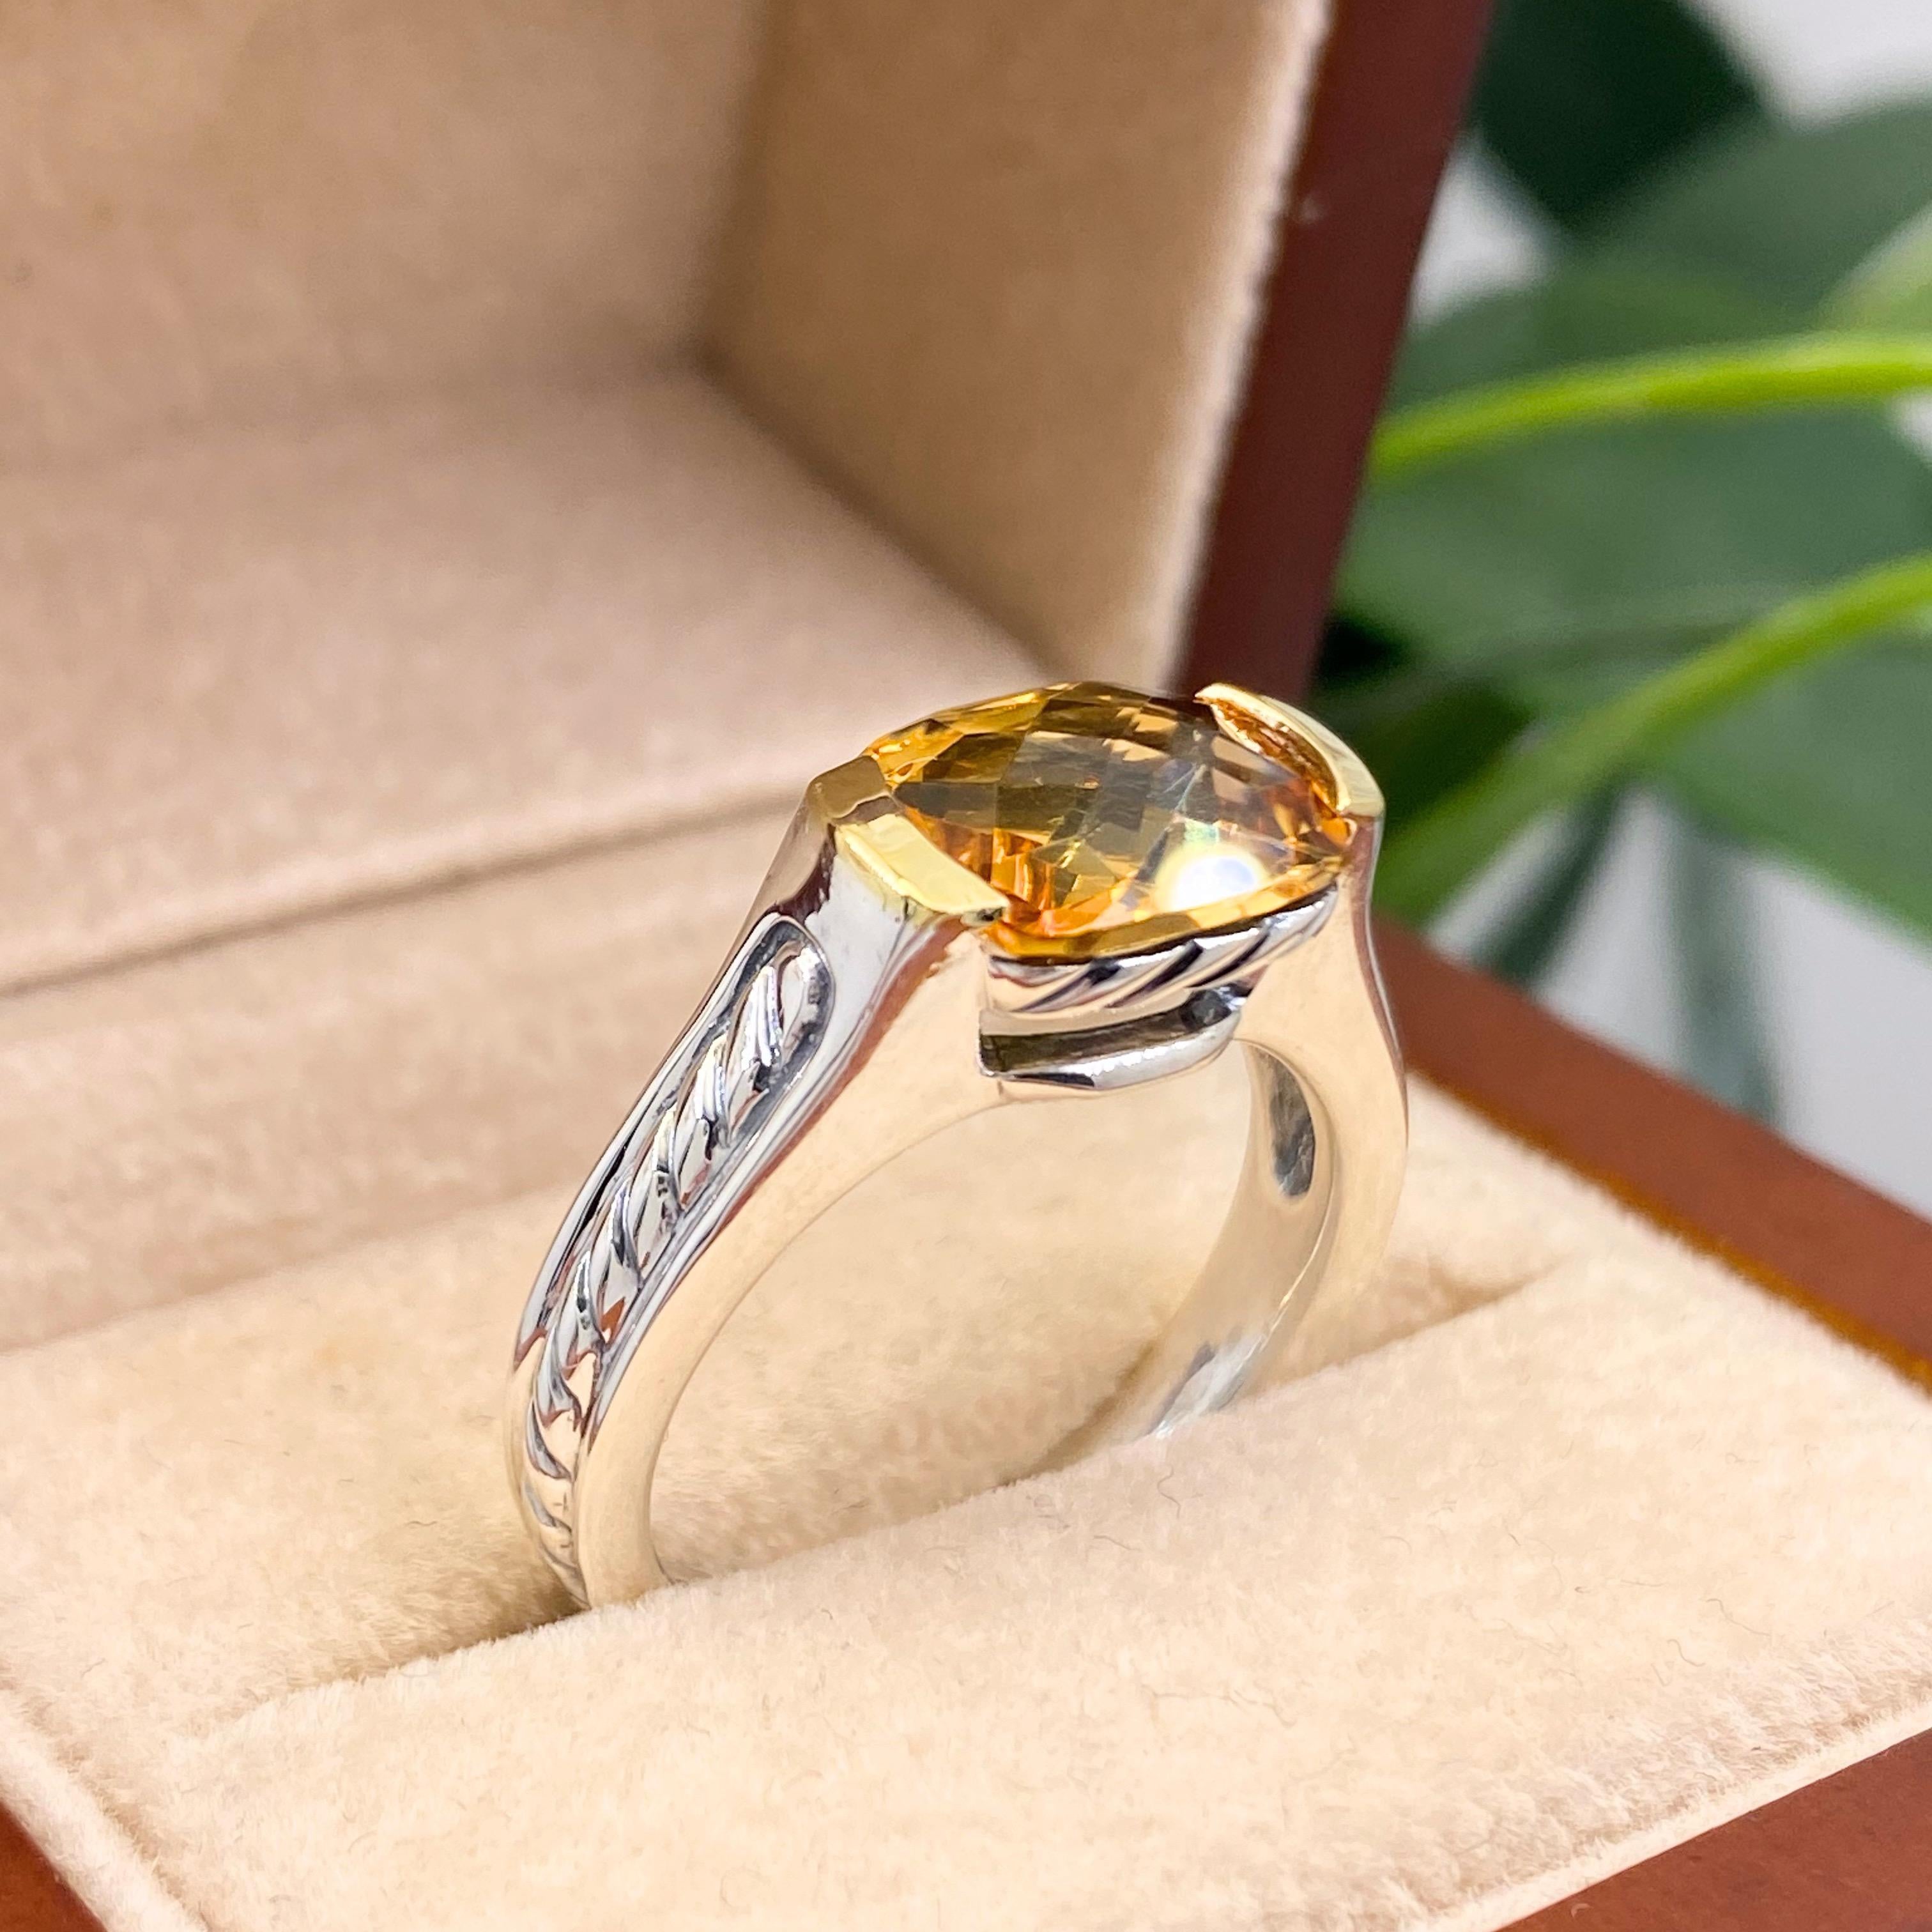 Oval Cut David Yurman Faceted Citrine Ring 18 Karat Yellow Gold and Sterling Silver